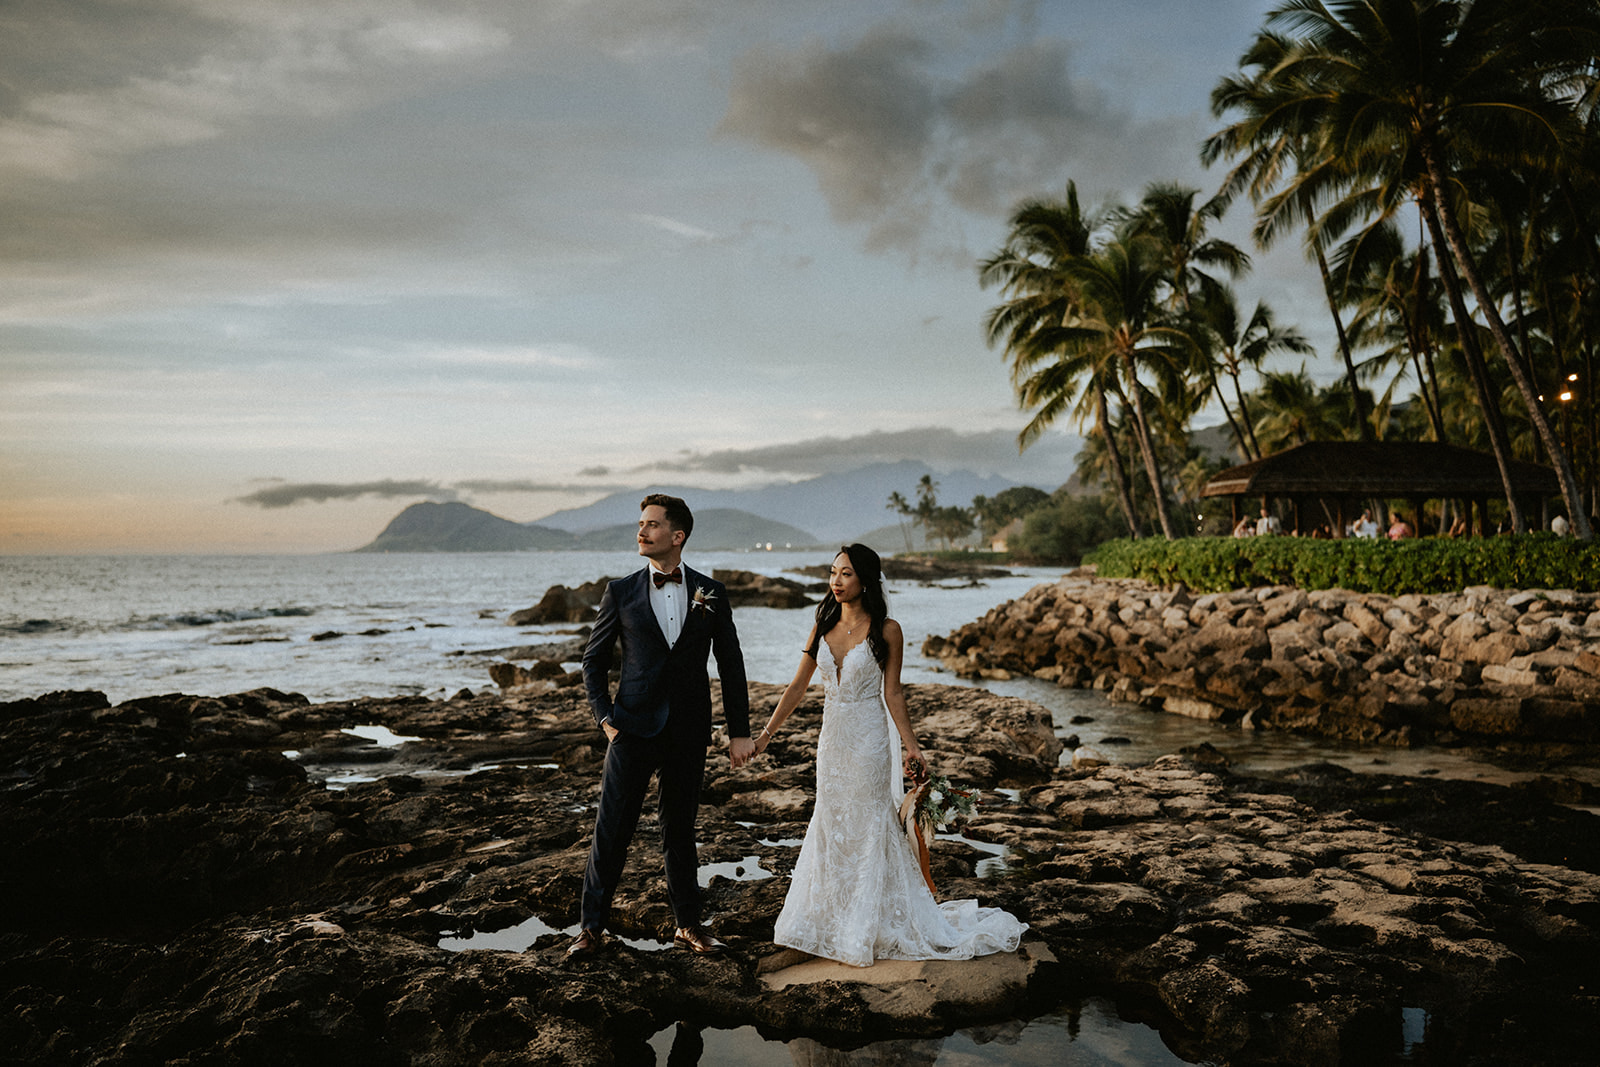 A couple who got married at Lanikuhonua pose on the rocky shores by the beach